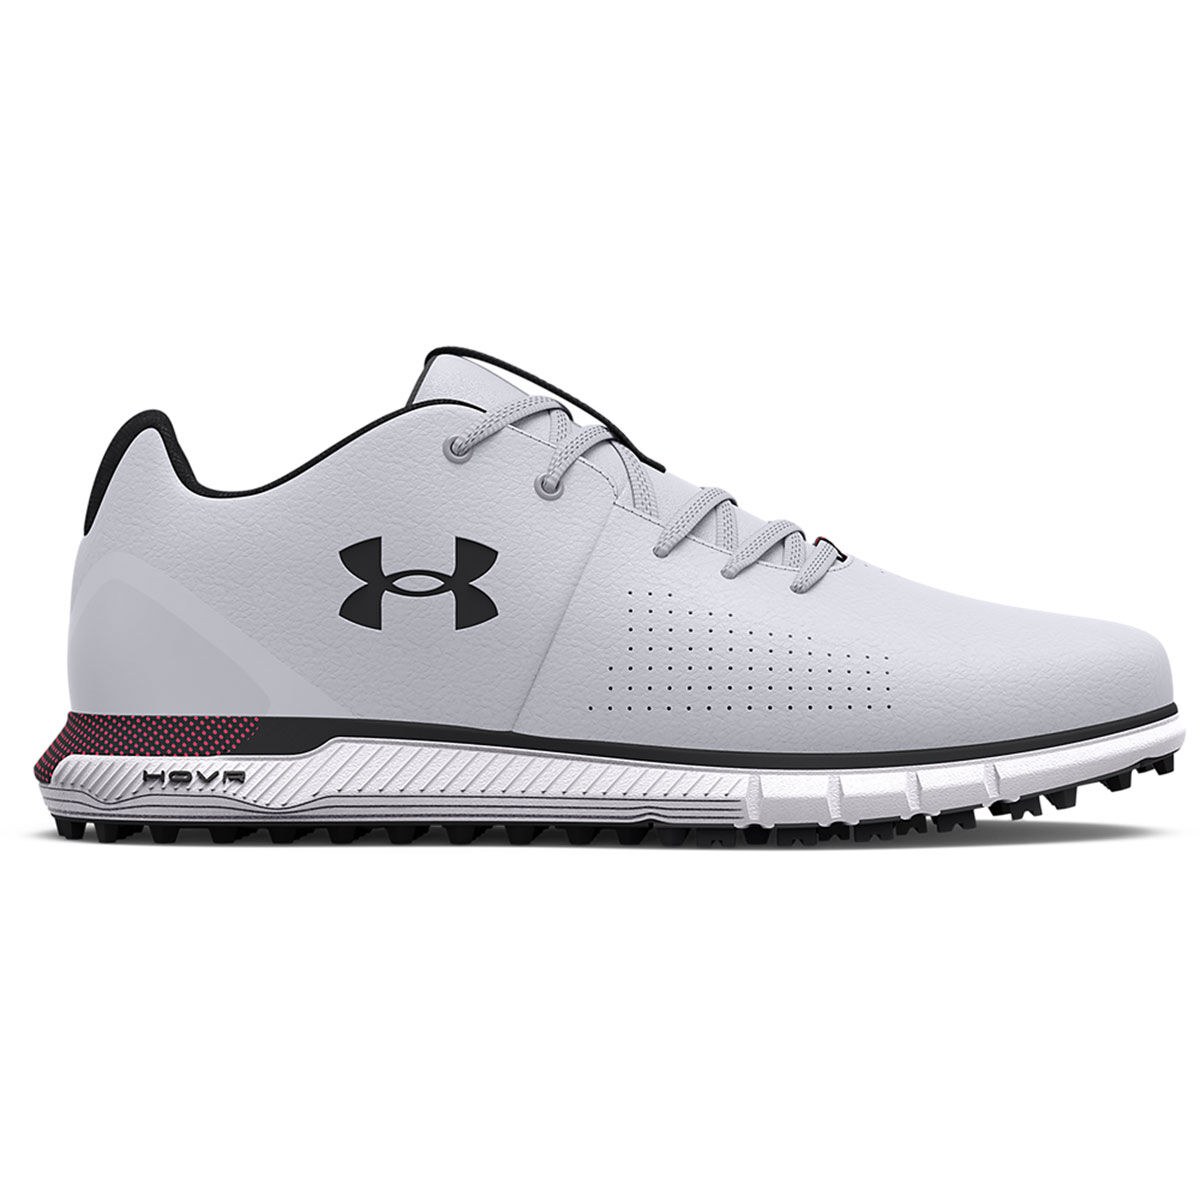 Under Armour Men’s HOVR Fade 2 Wide Spikeless Golf Shoes, Mens, Grey/black/black, 9 | American Golf